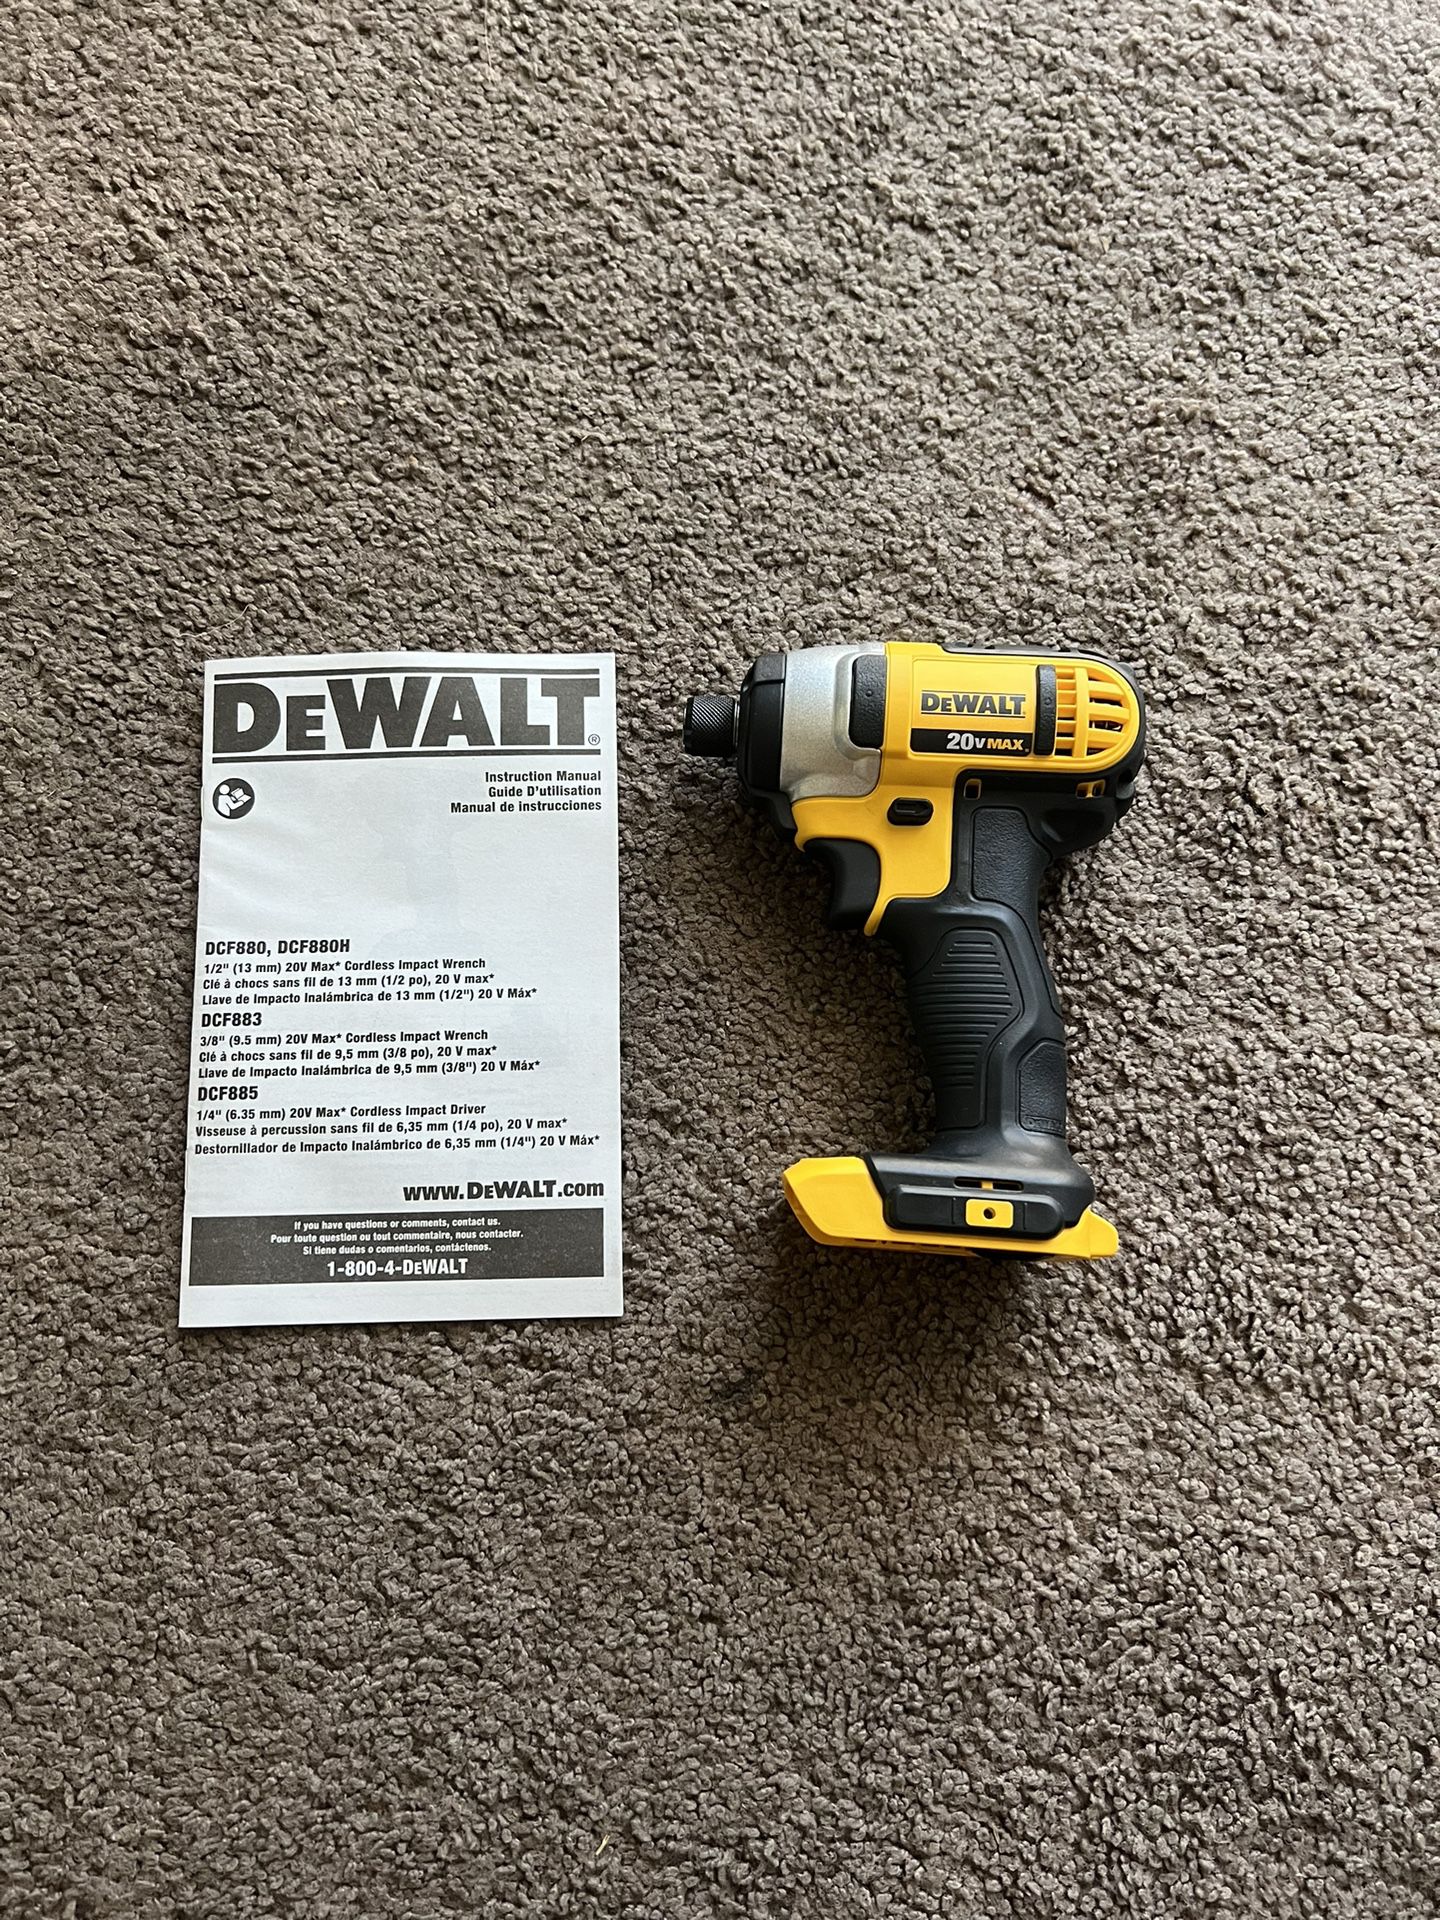 Dewalt Impact Driver DCF885 Lithium-Ion Cordless 1/4 in, 20-Volt MAX (Tool Only Brand New)